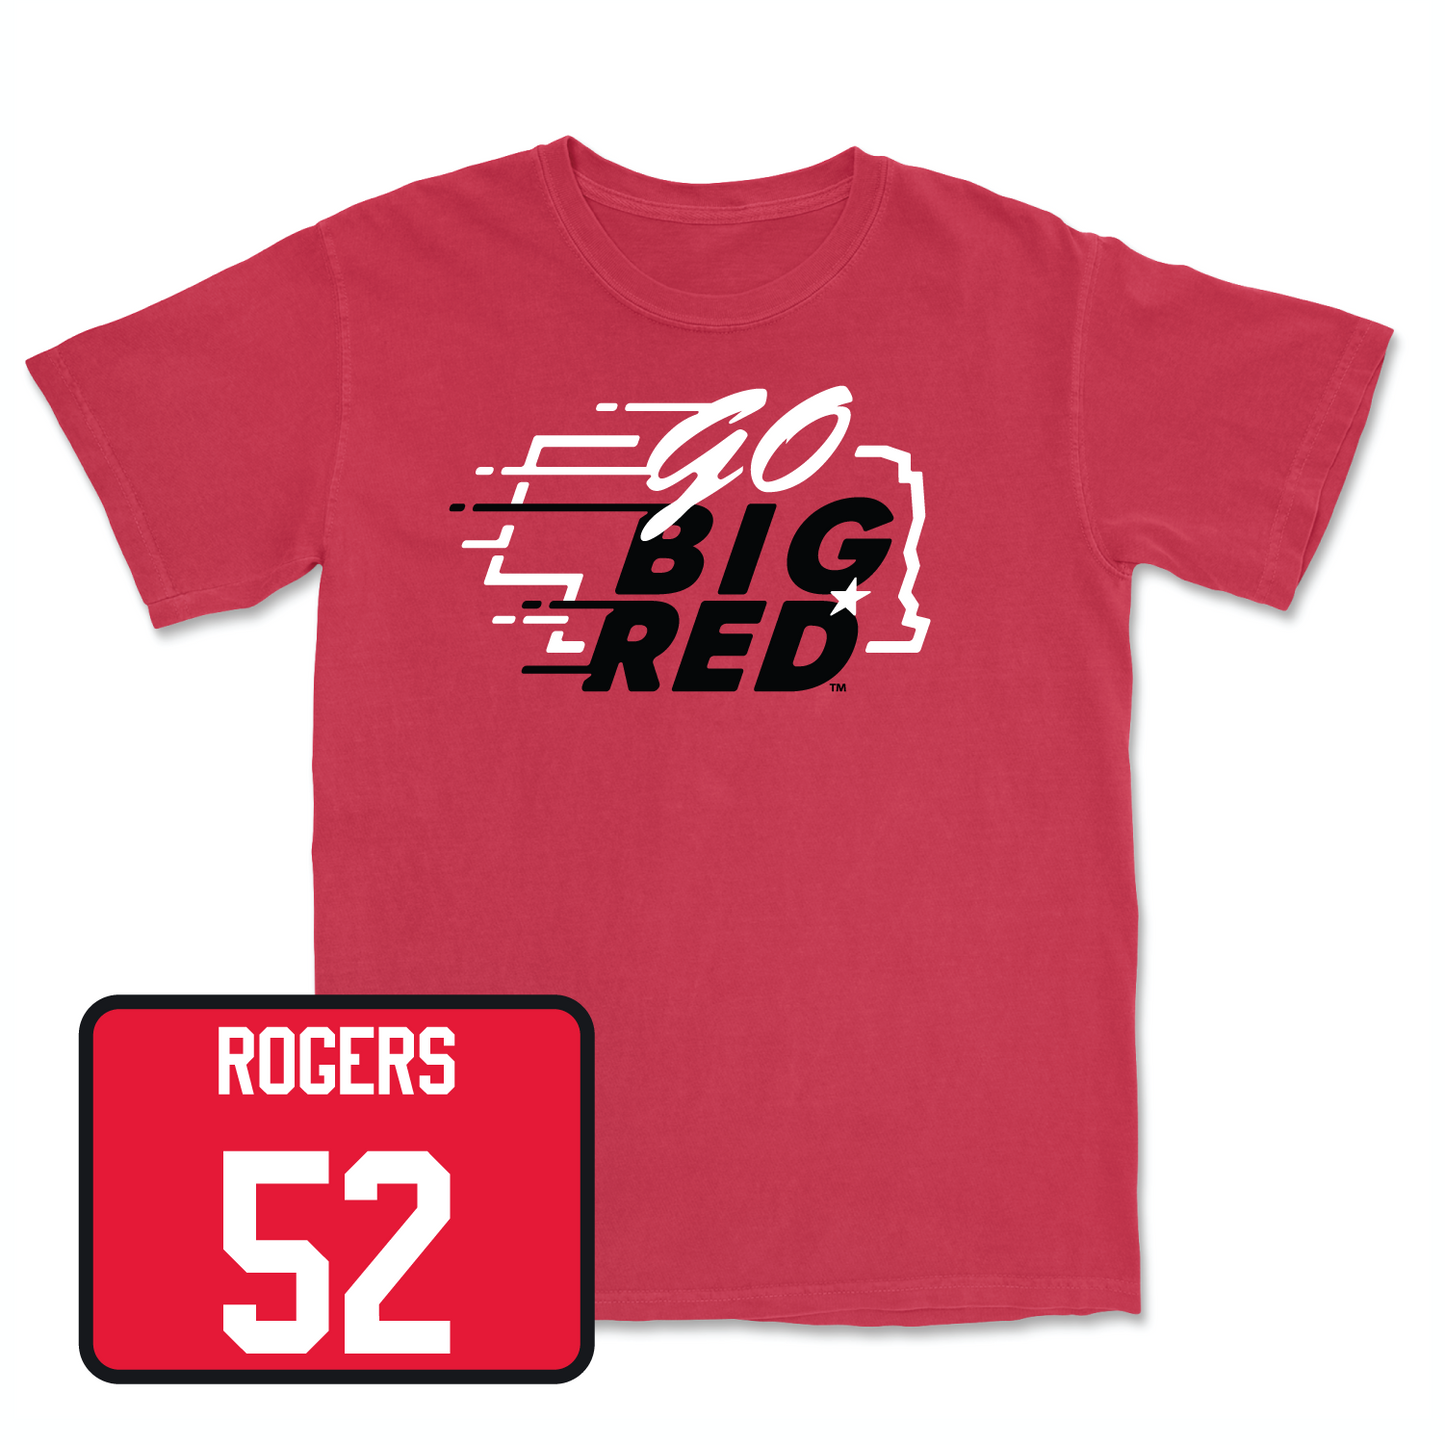 Red Football GBR Tee X-Large / Dylan Rogers | #52